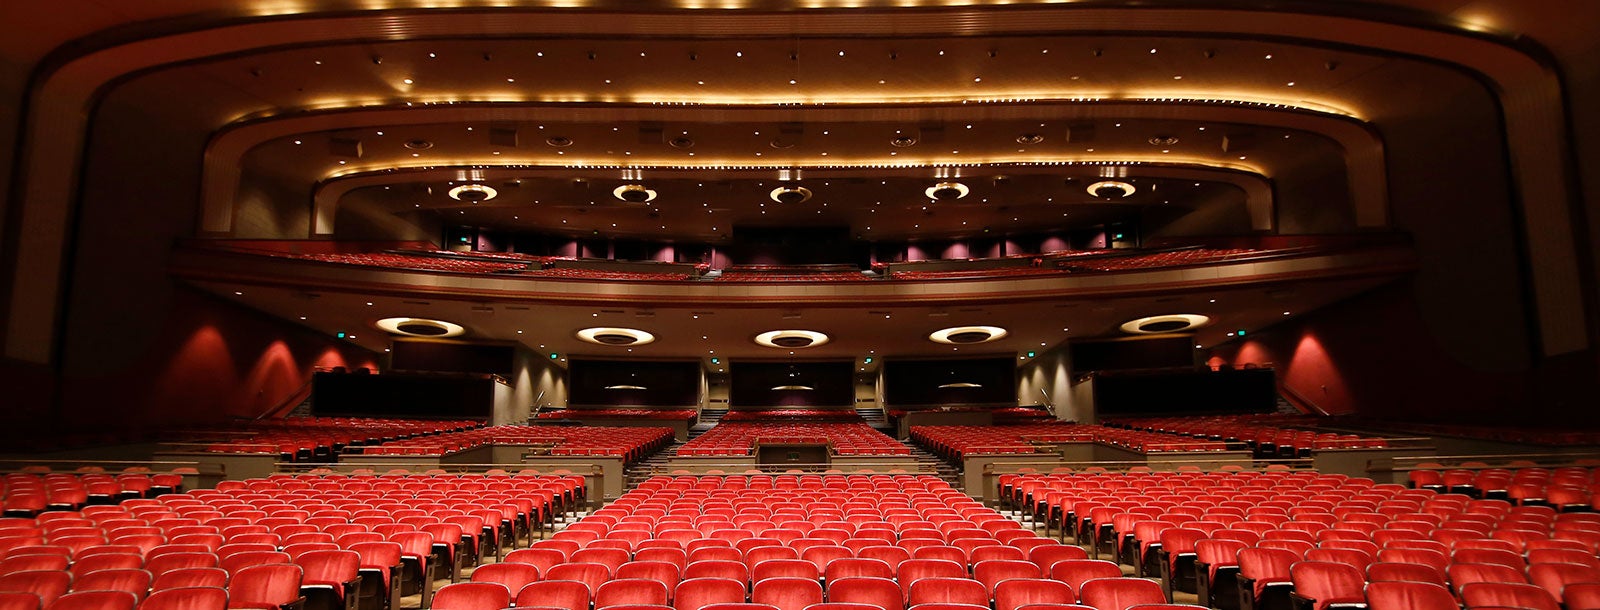 Iu Auditorium Seating Chart With Seat Numbers